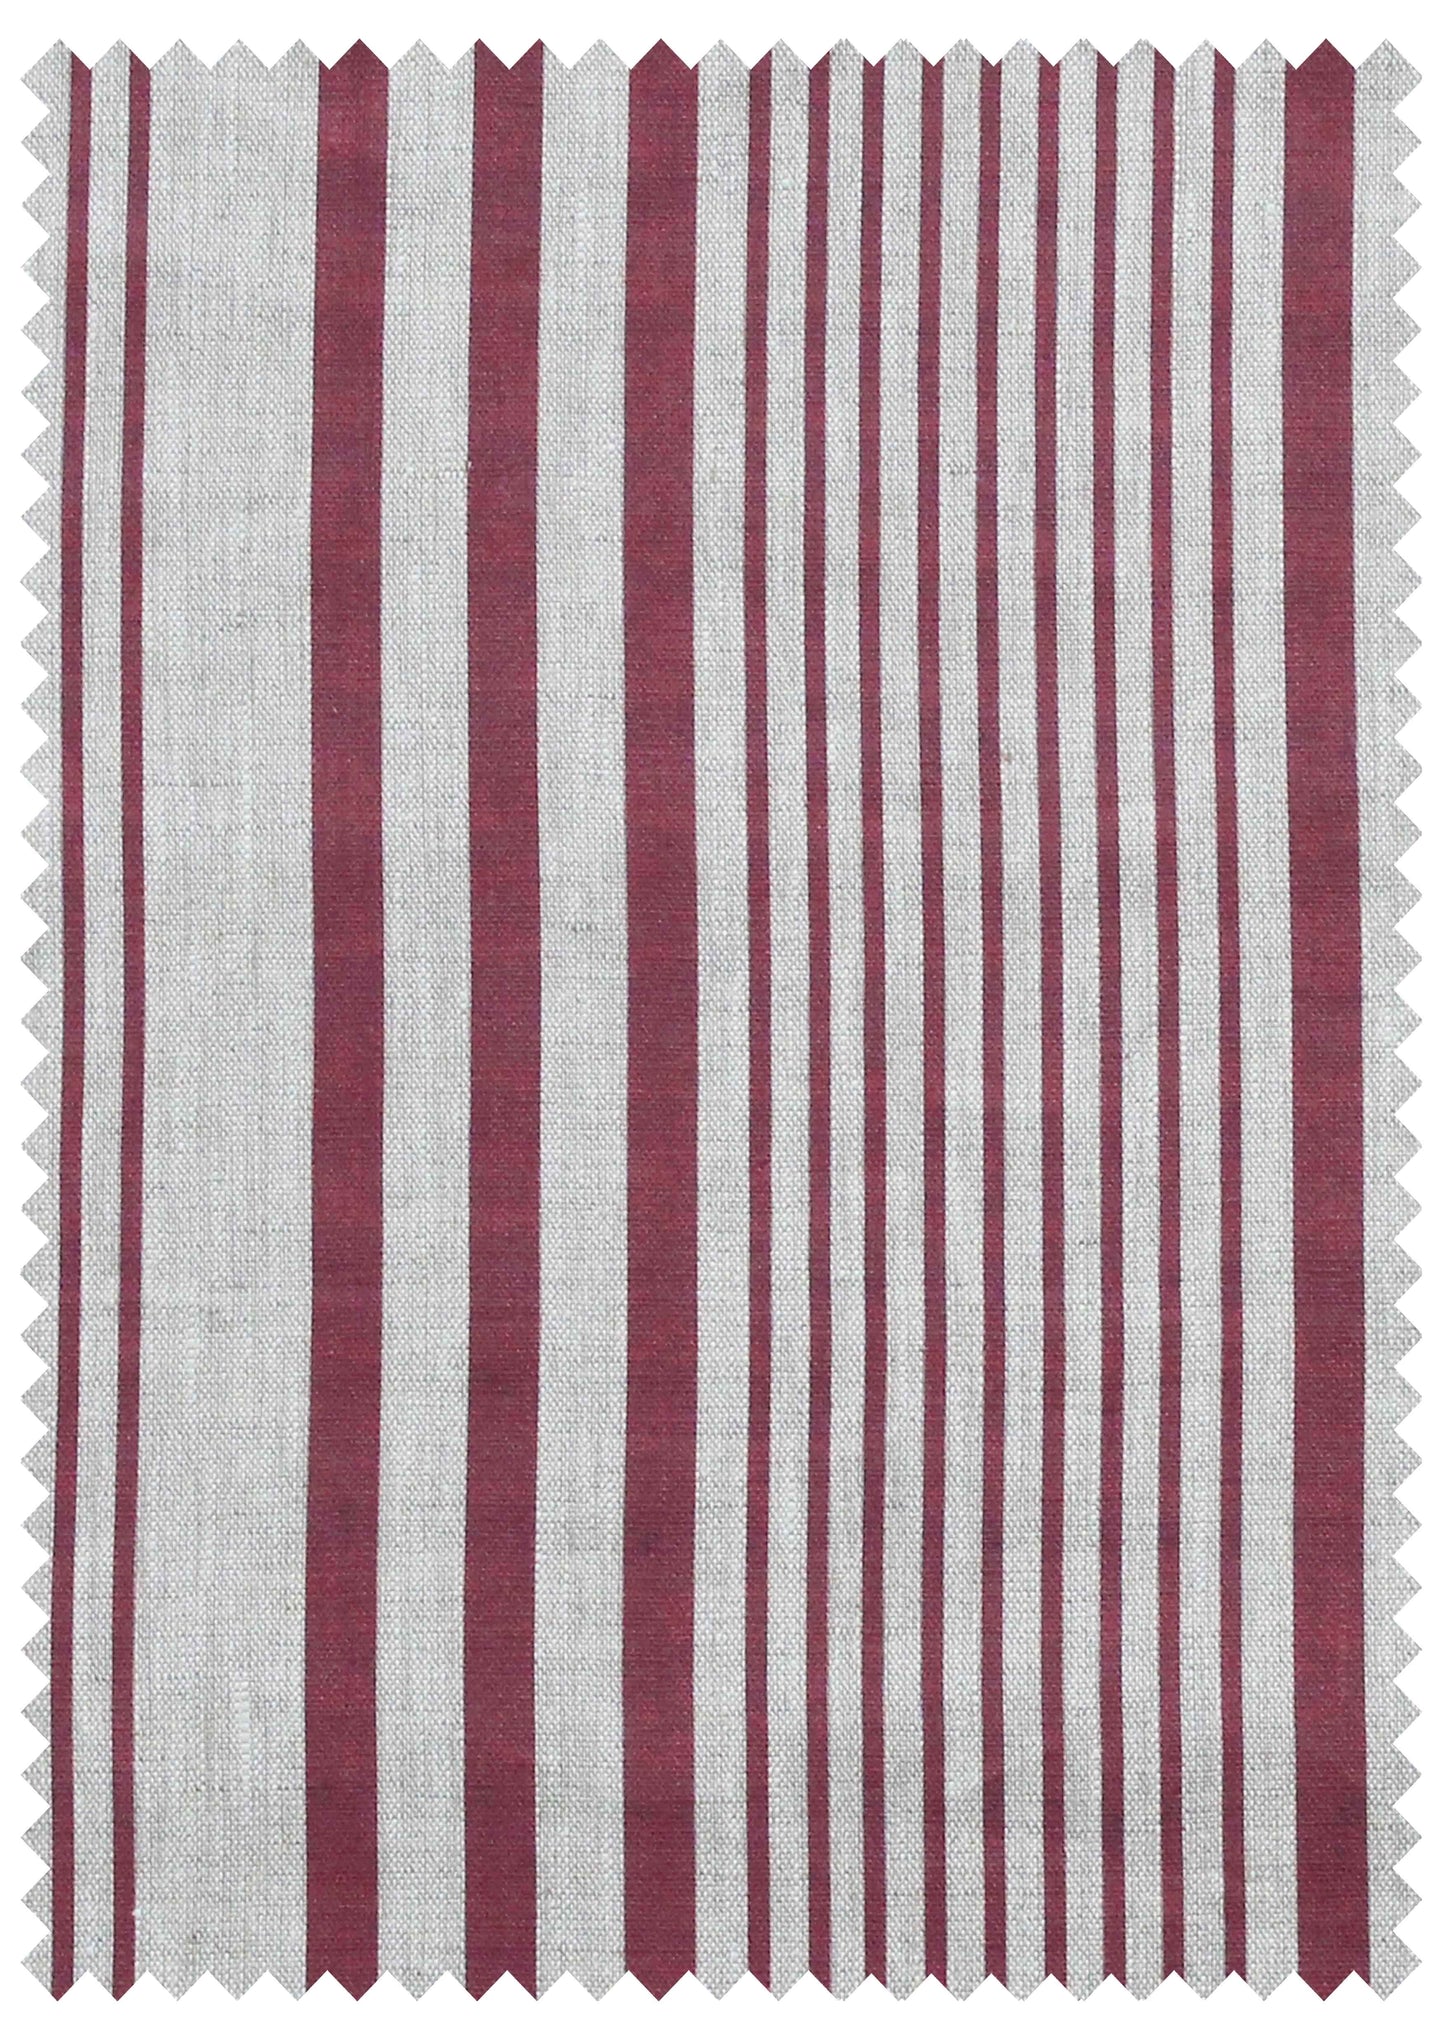 Stanley Stripe French Raspberry - Natural Linen Swatch